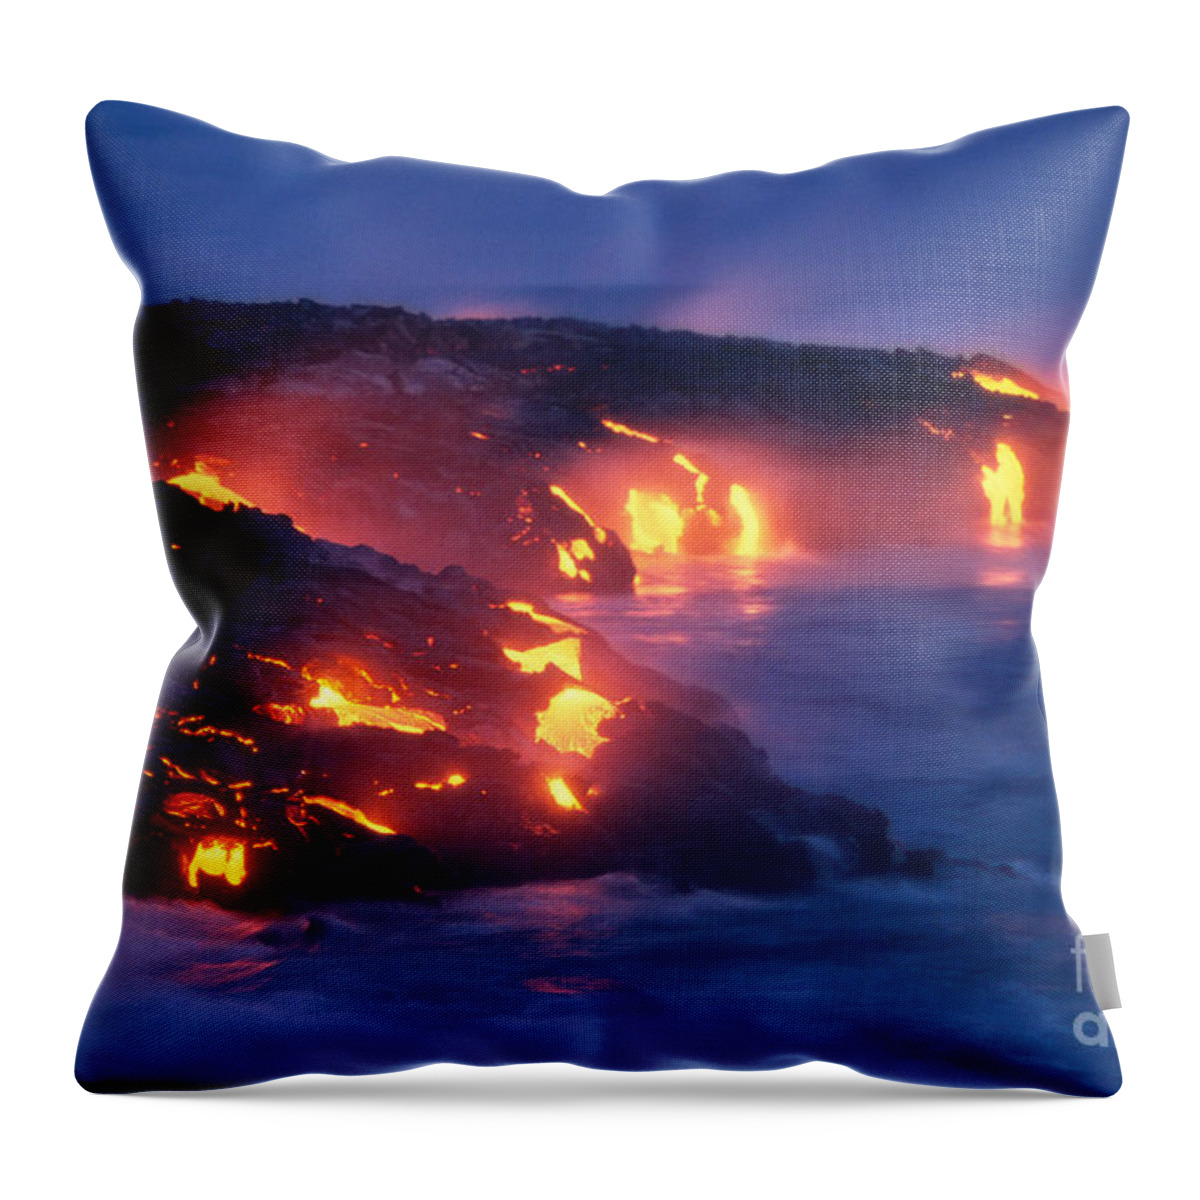 A27d Throw Pillow featuring the photograph Lava Flow by Peter French - Printscapes